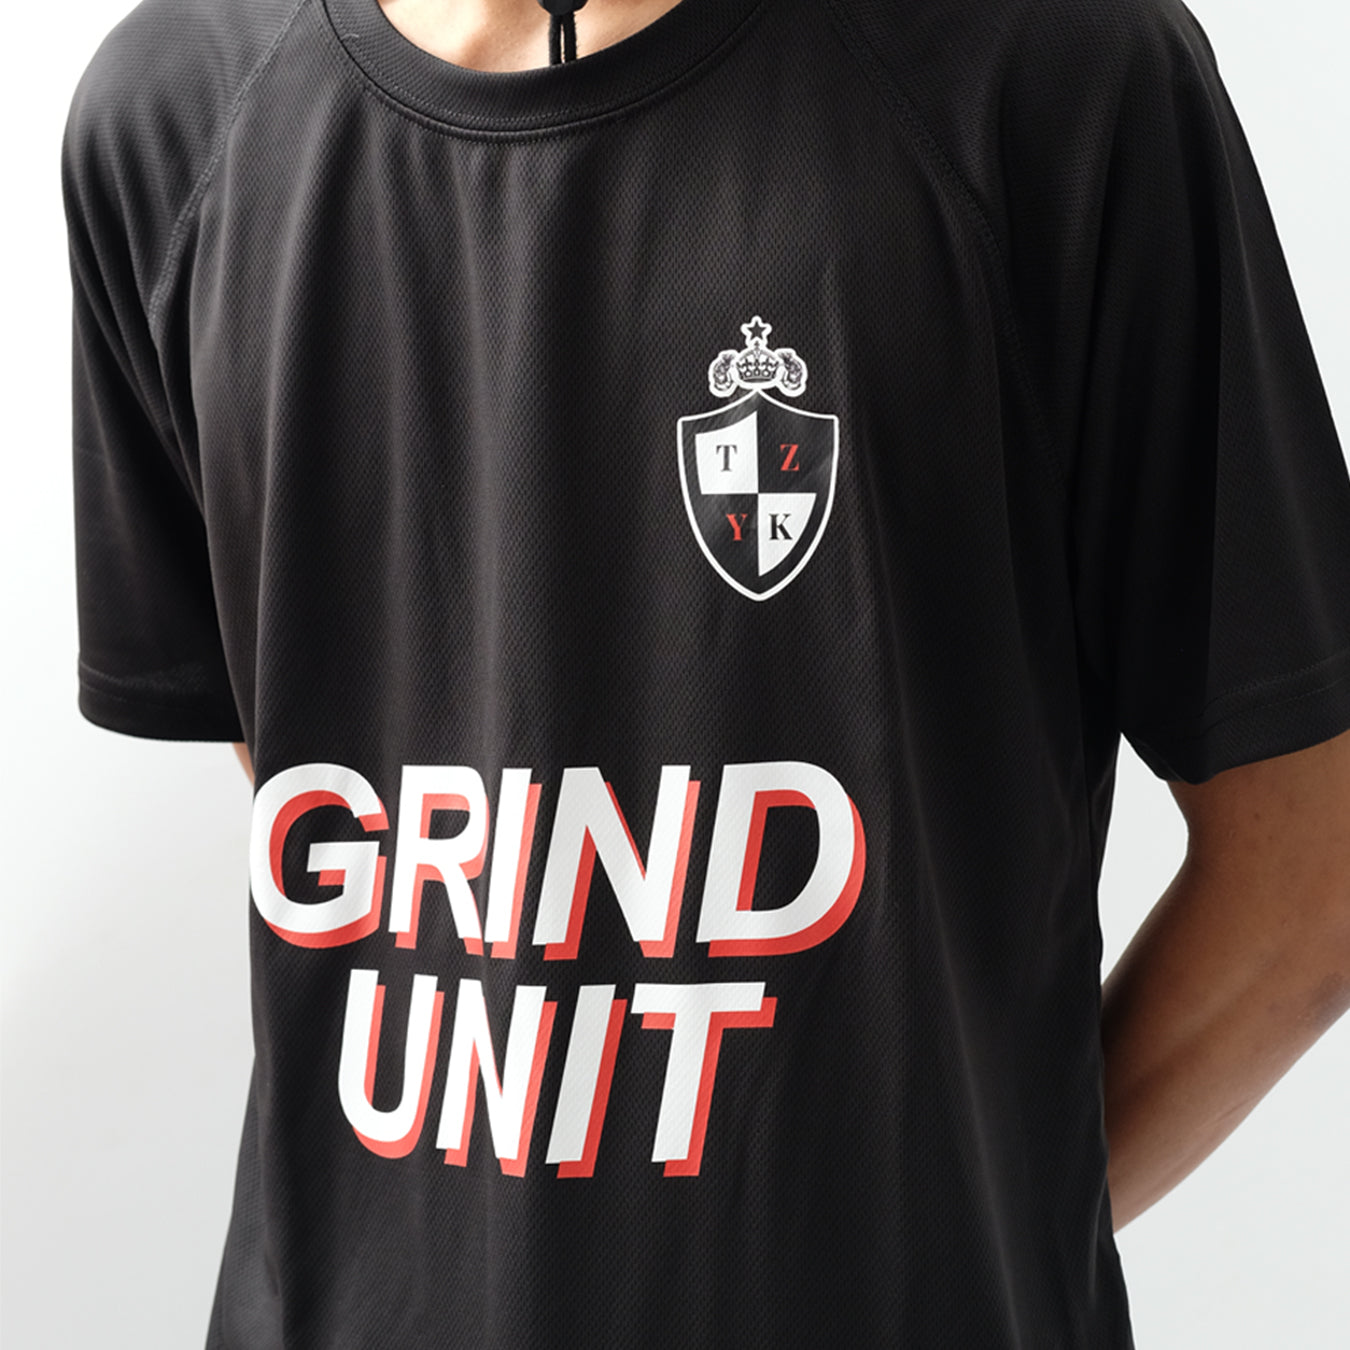 THEZOOYK - Grind Unit Dry-Fit Jersey/Black